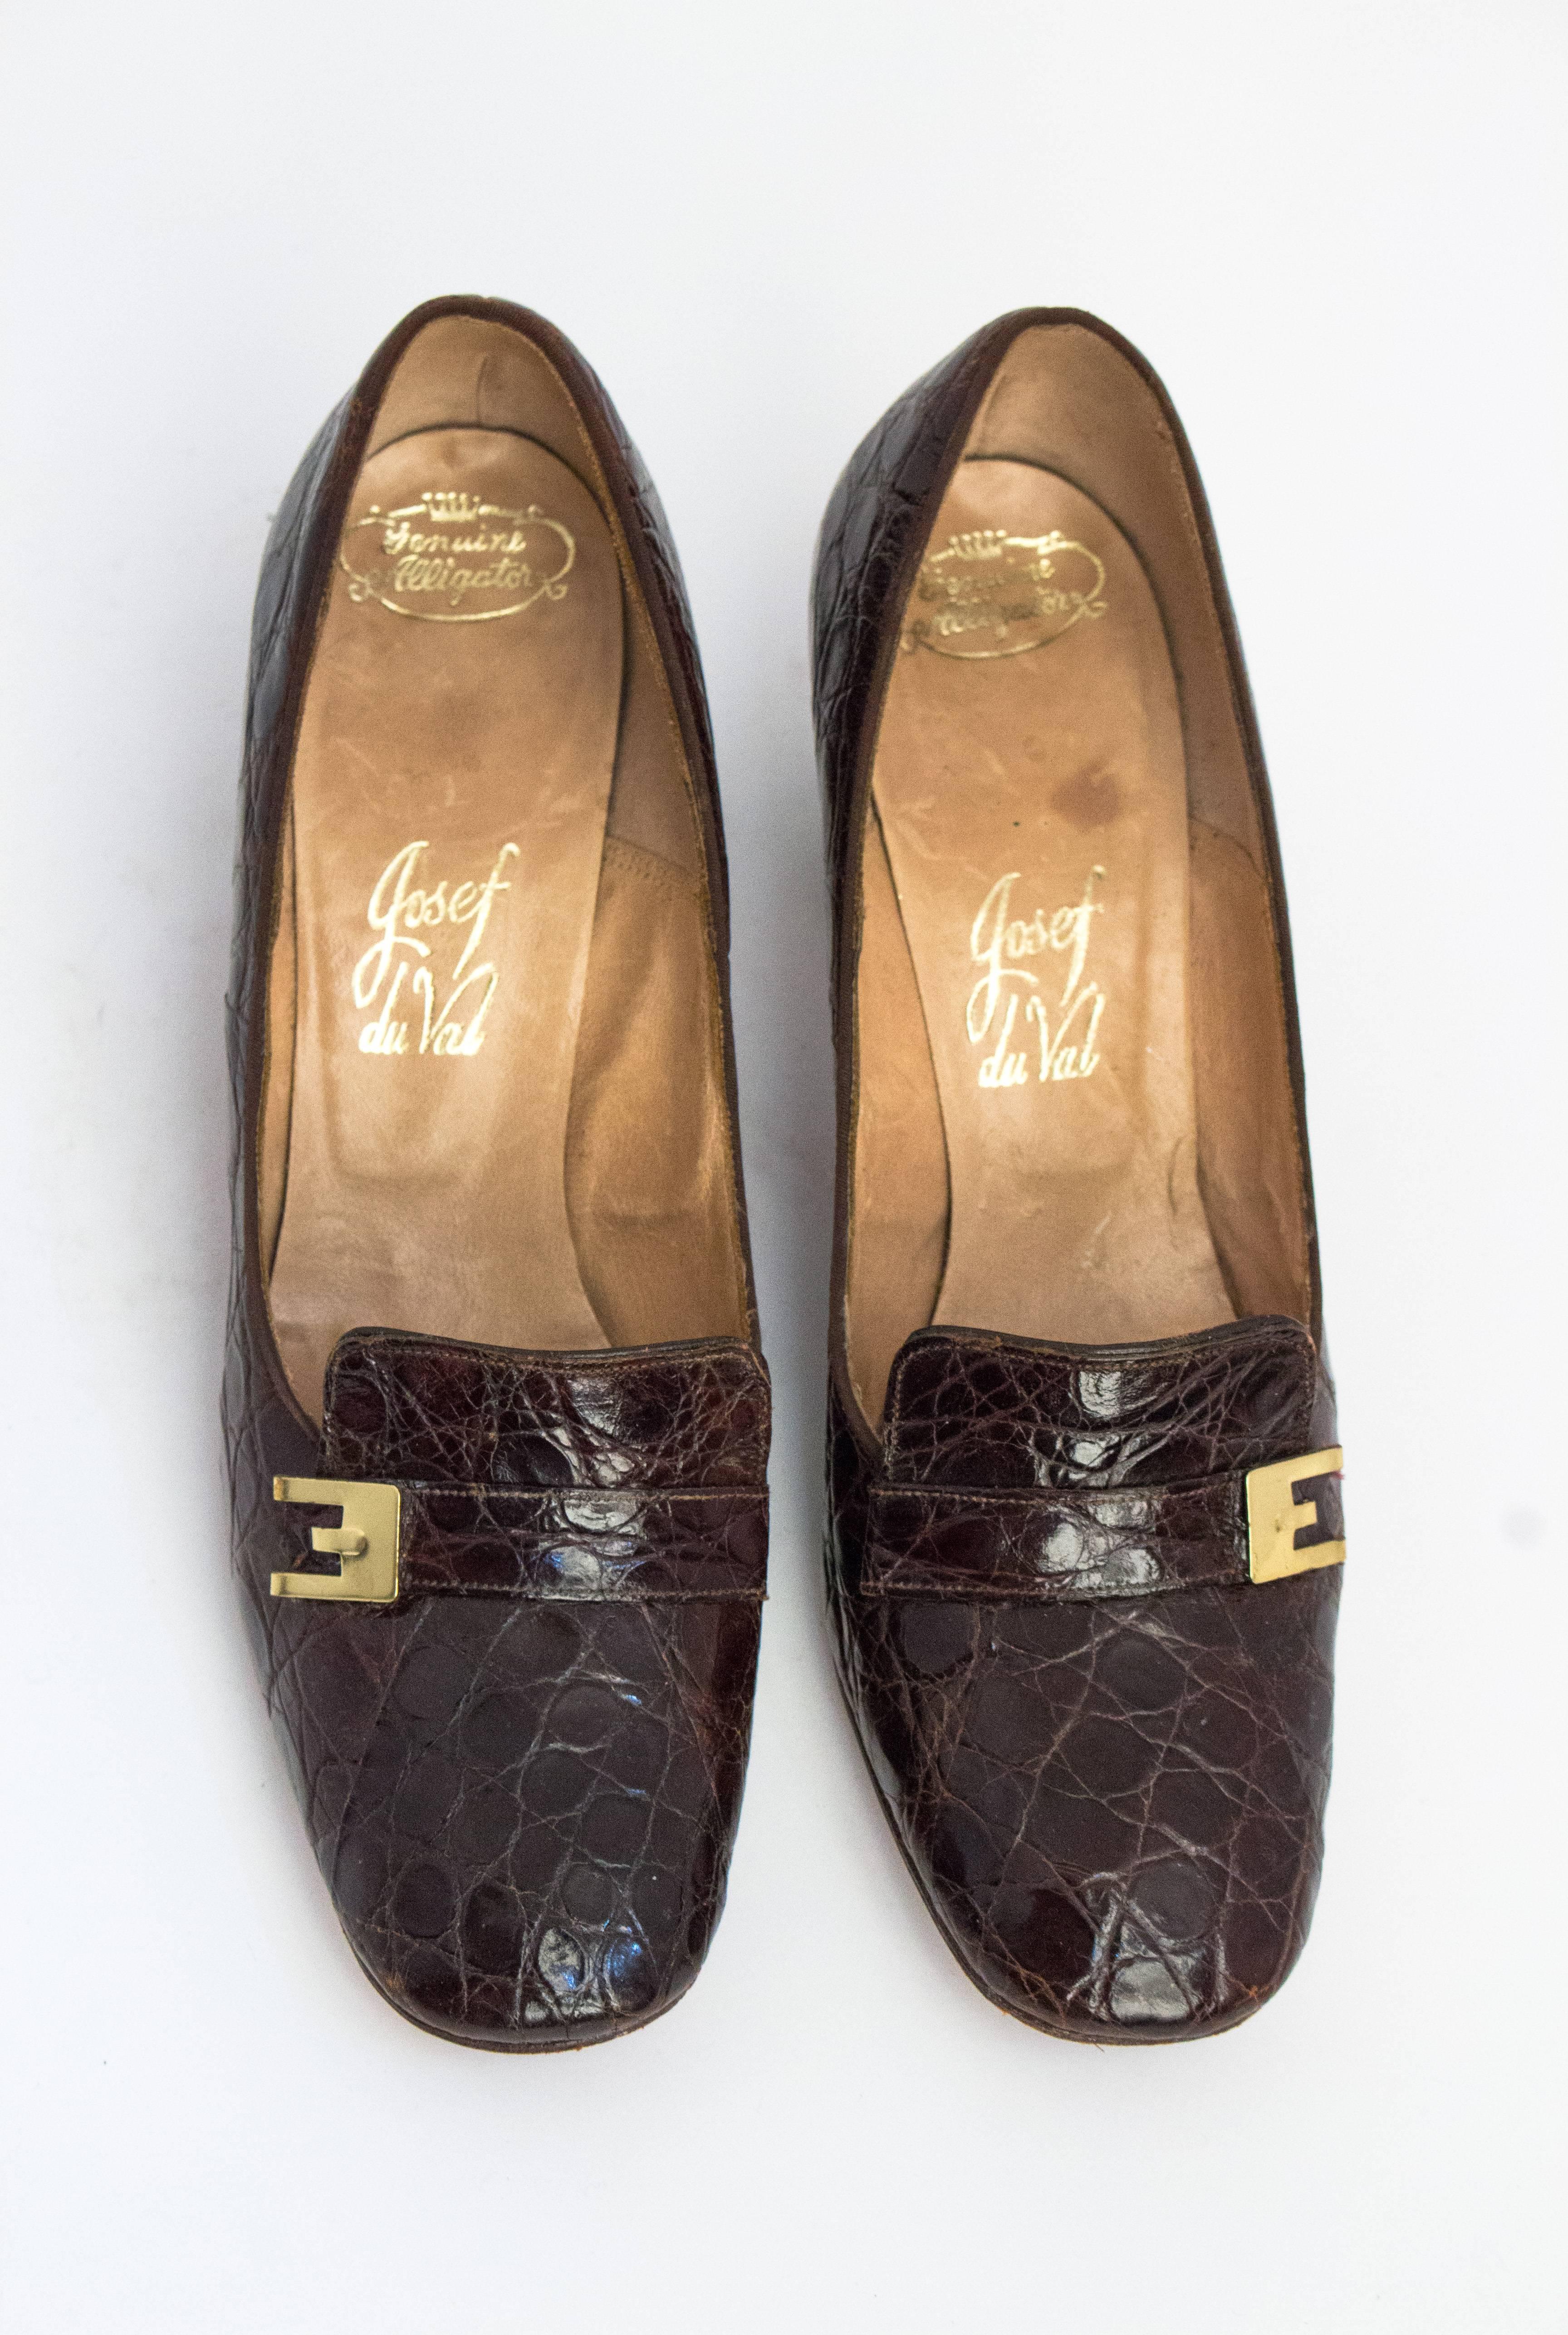 1960s chunky heel alligator pump. Faux buckle detail on front. Leather sole. US size 7 1/2 A.

Palm of foot: 2 5/8